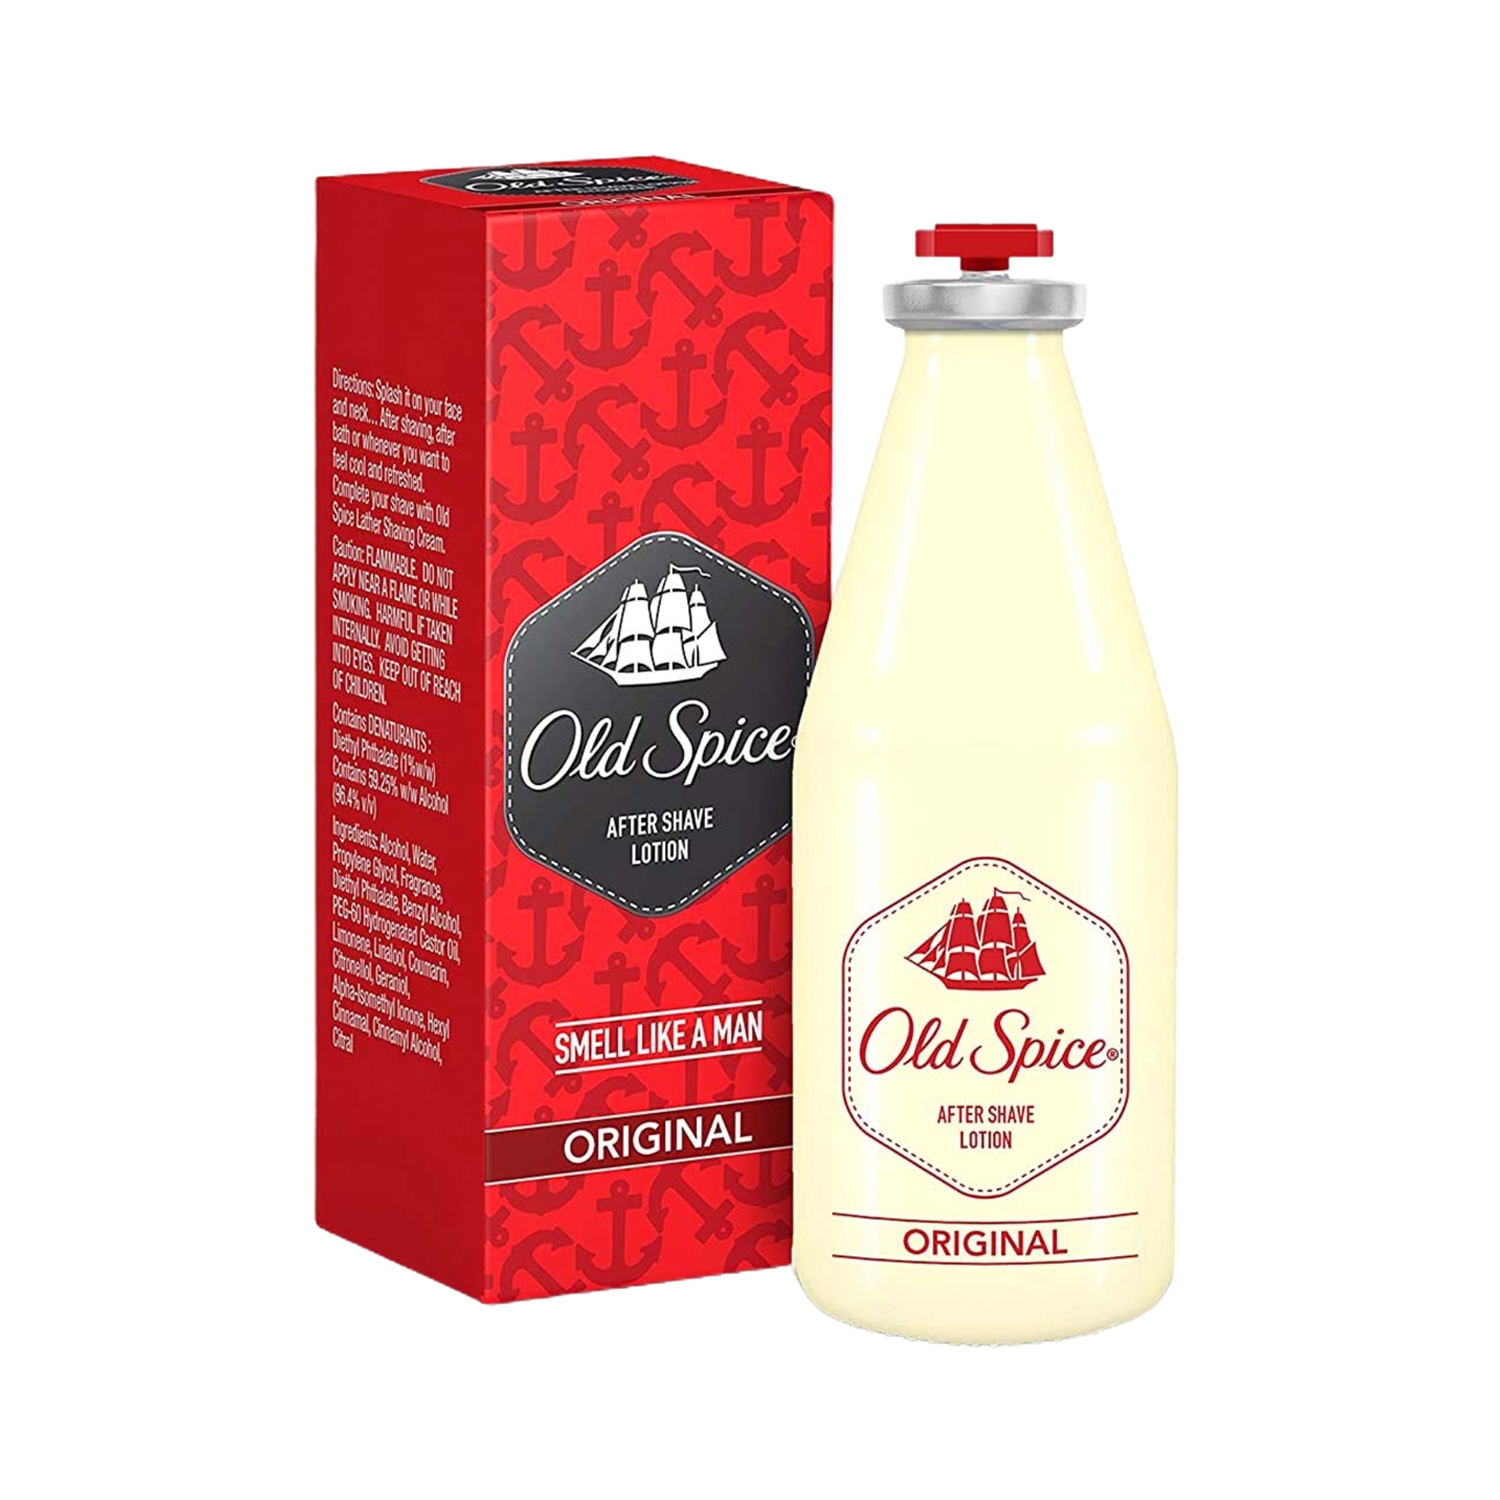 Old Spice | Old Spice Original After Shave Lotion (50ml)